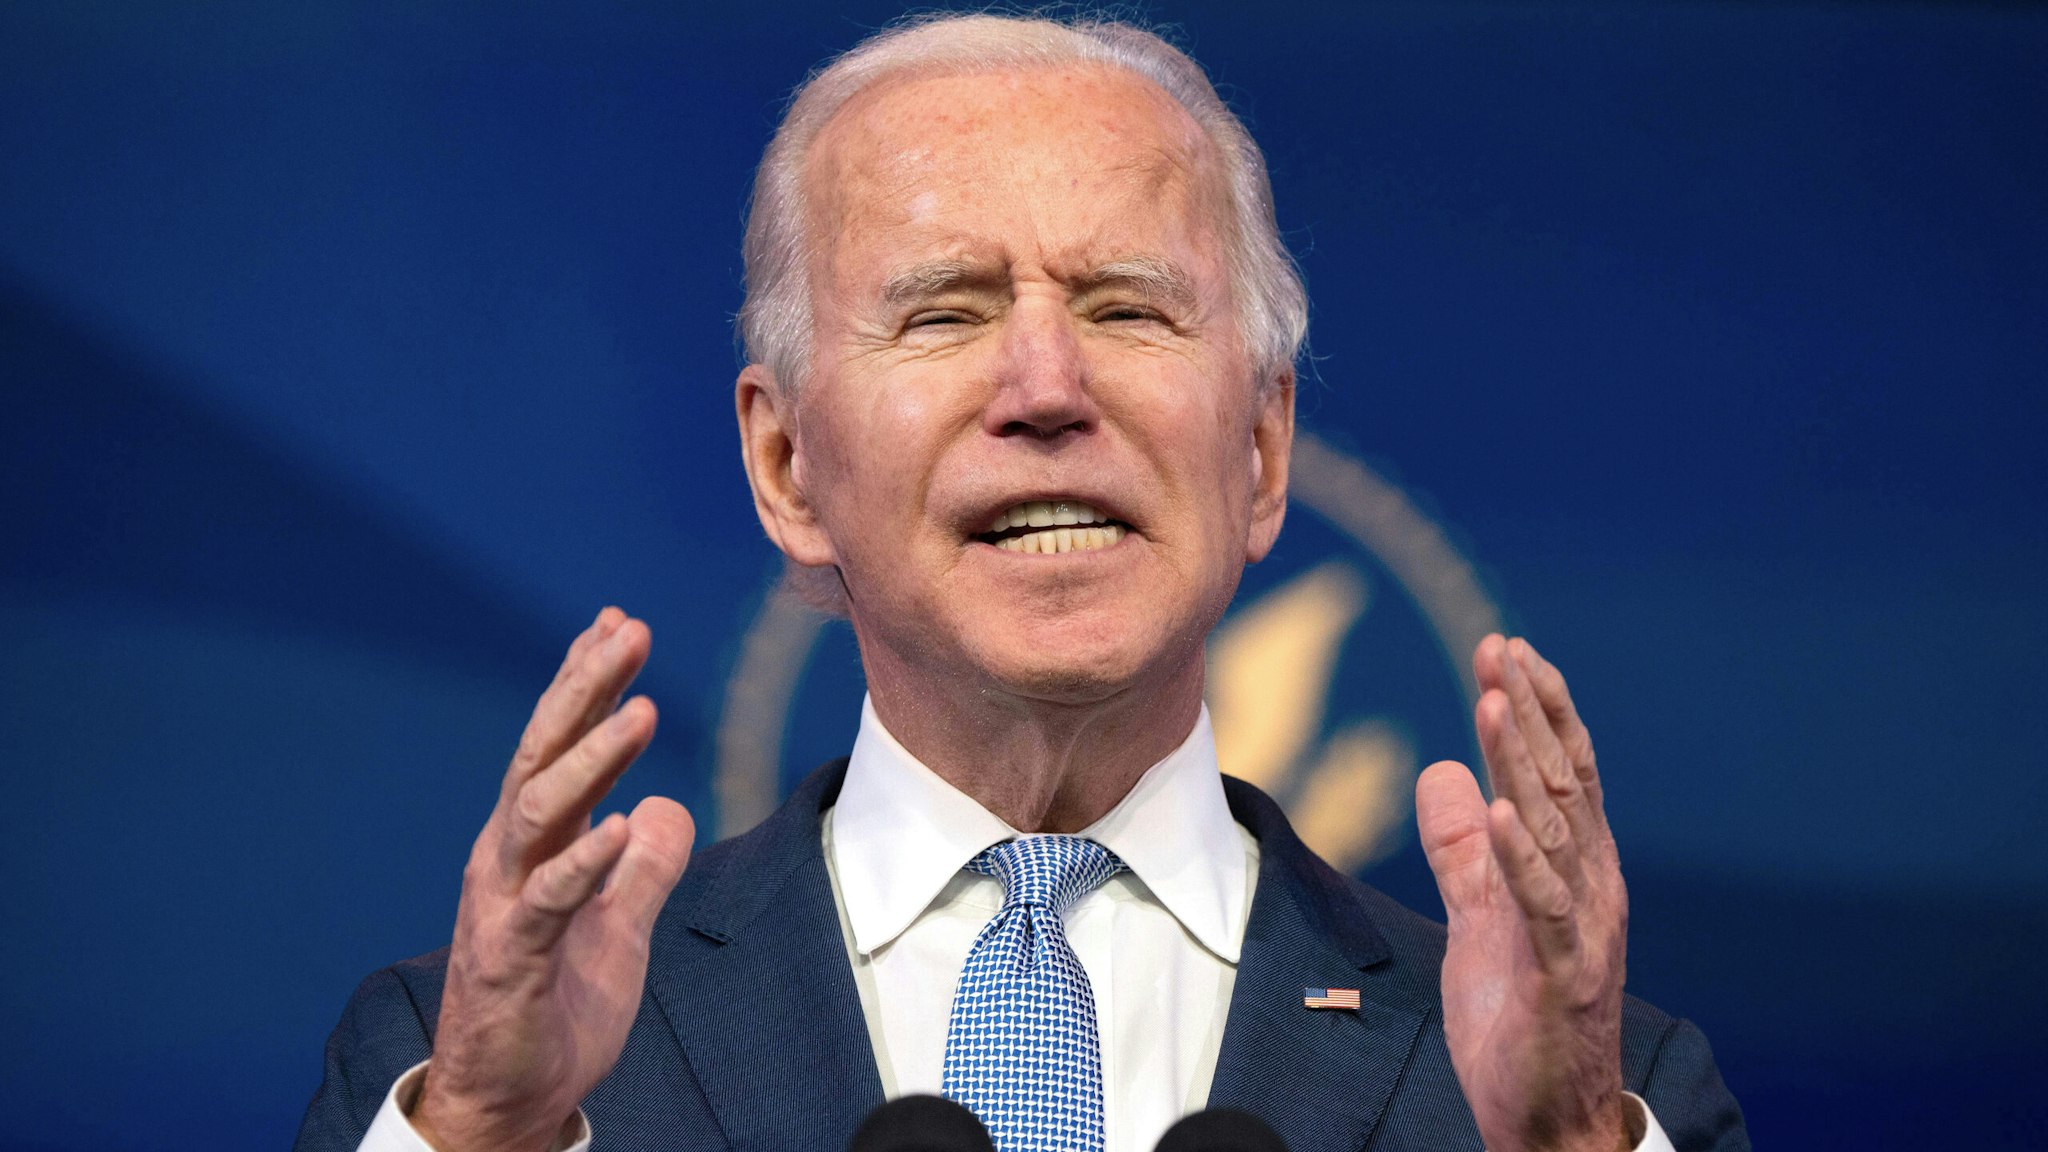 US President-elect Joe Biden speaks at the Queen Theater on January 6, 2021, in Wilmington, Delaware. - Biden on Wednesday denounced the storming of the US Capitol as an "insurrection" and demanded President Donald Trump go on television to call an end to the violent "siege."